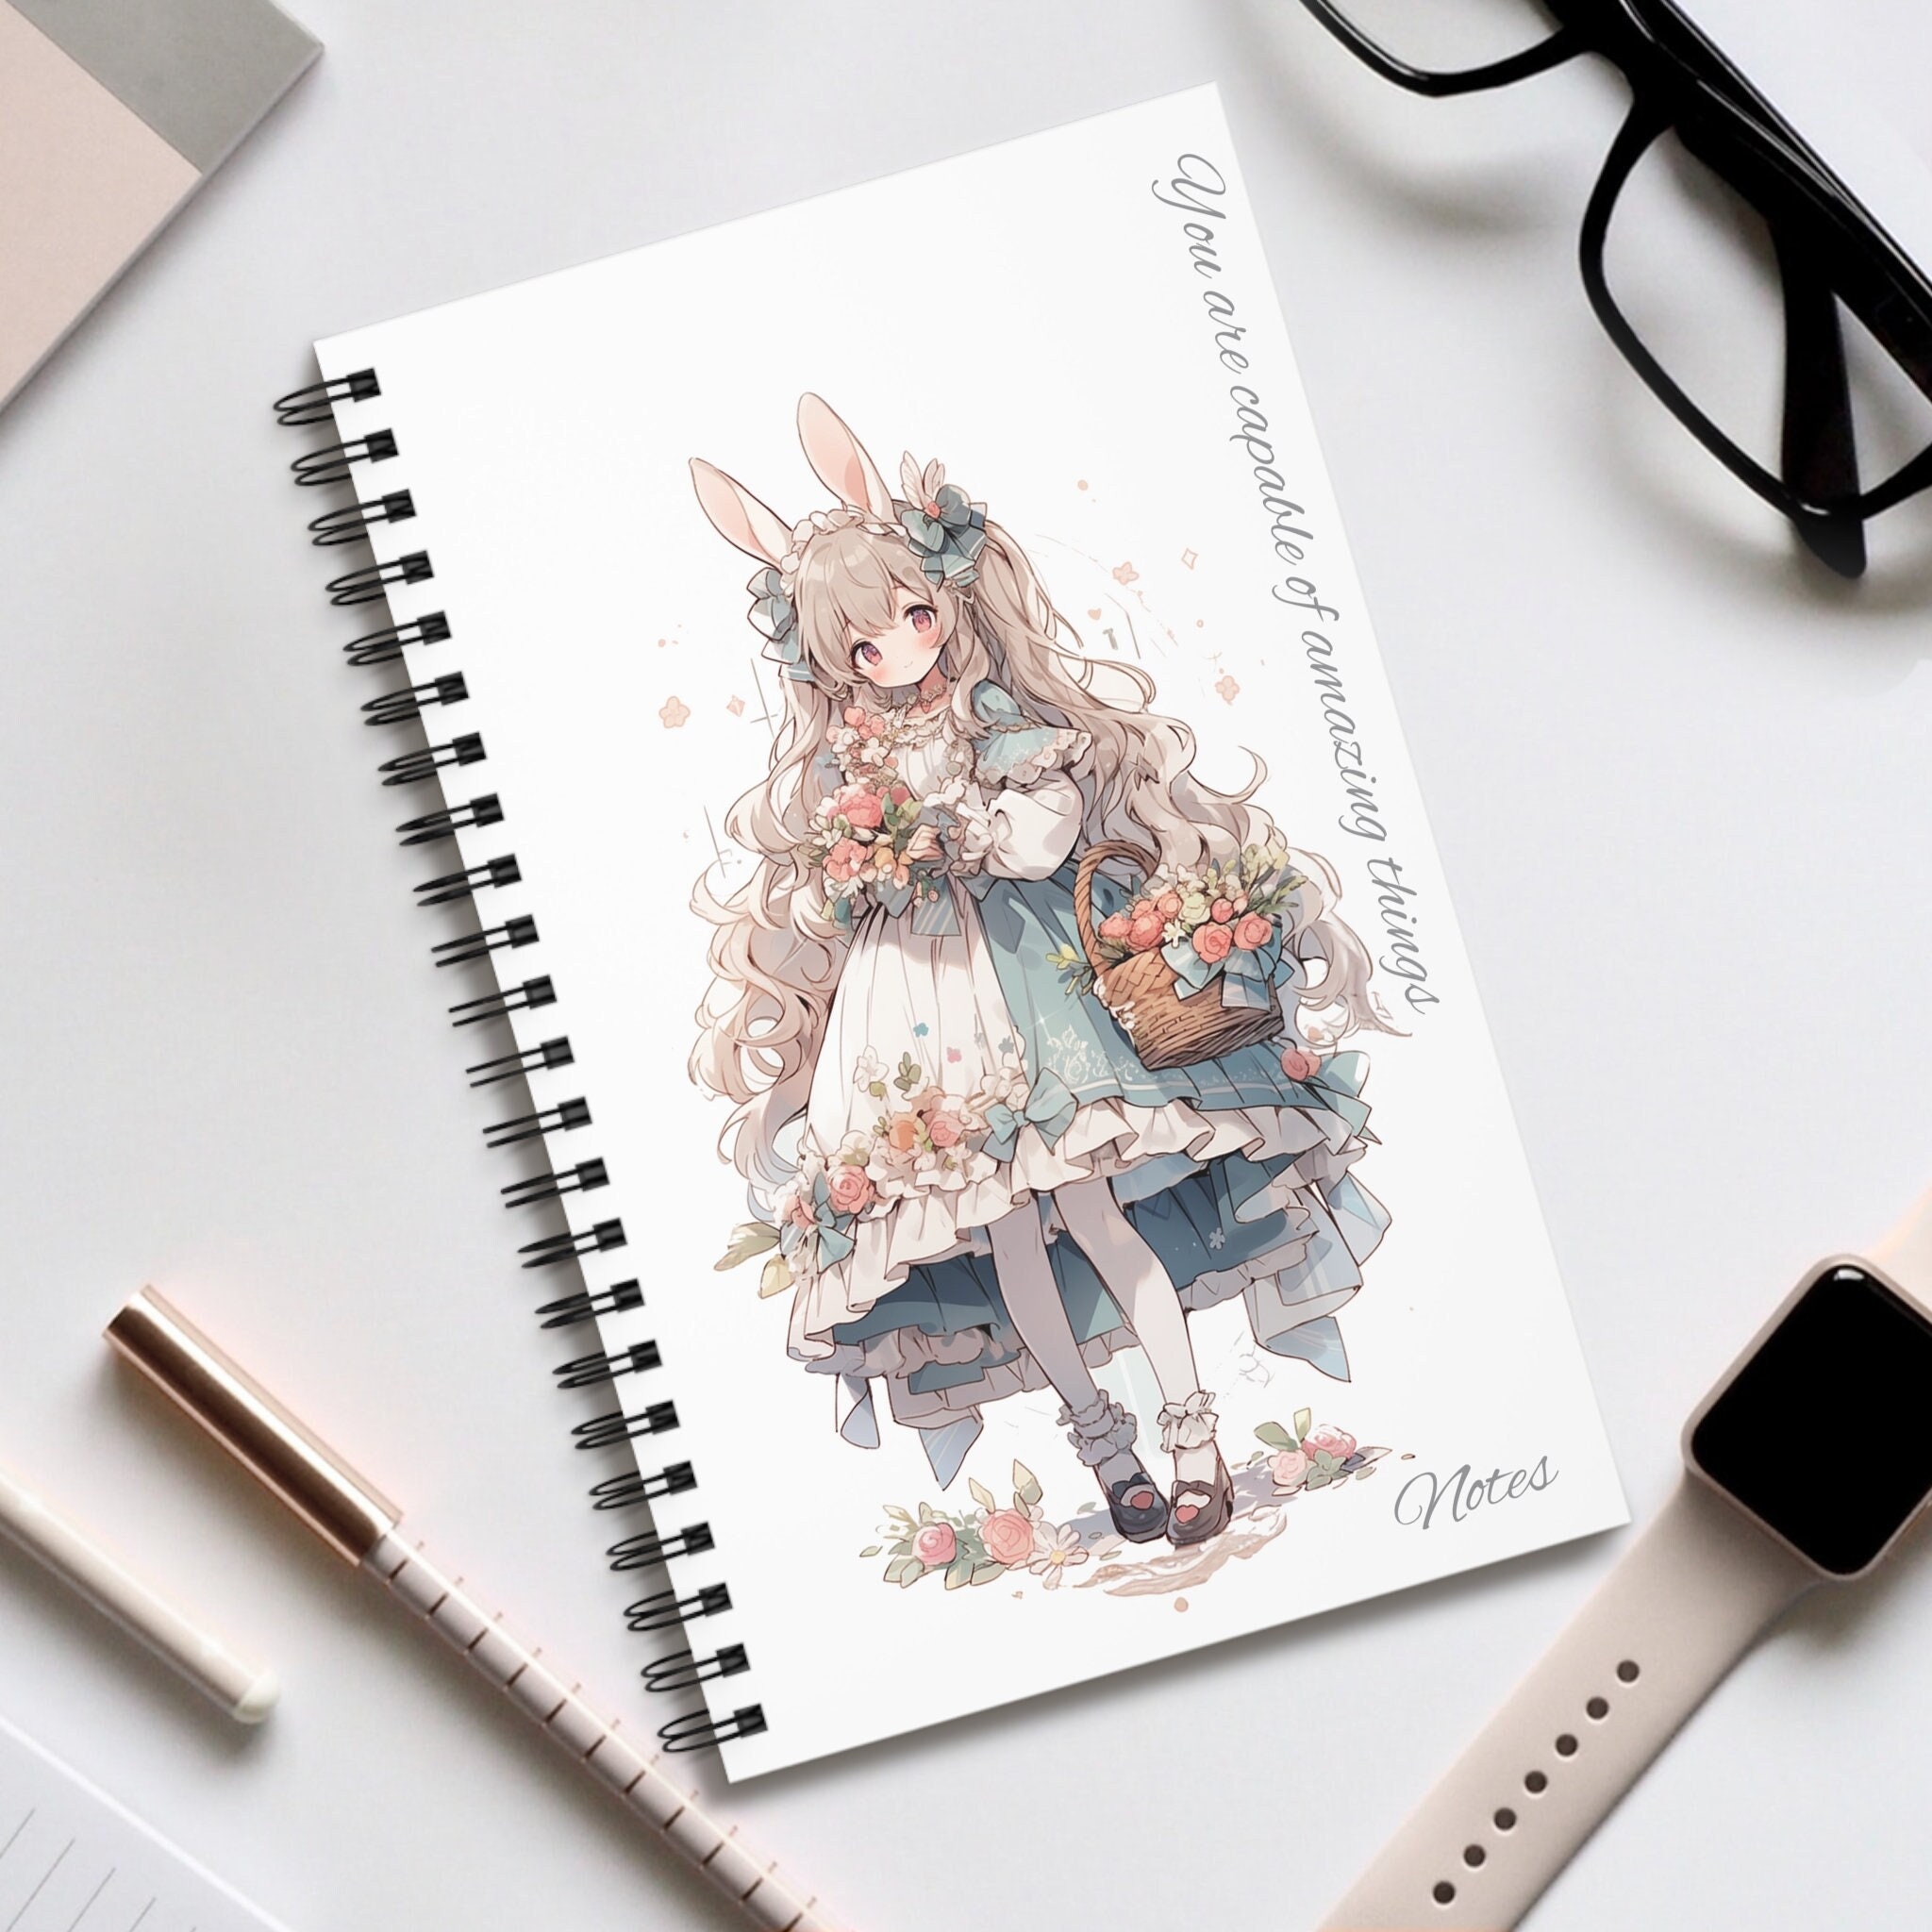 Sketchbook: Cute Mouse on Yellow Background Design. Large Blank Sketchbook Suitable for Girls. This Wonderful Sketch Notebook Is Great for Drawing